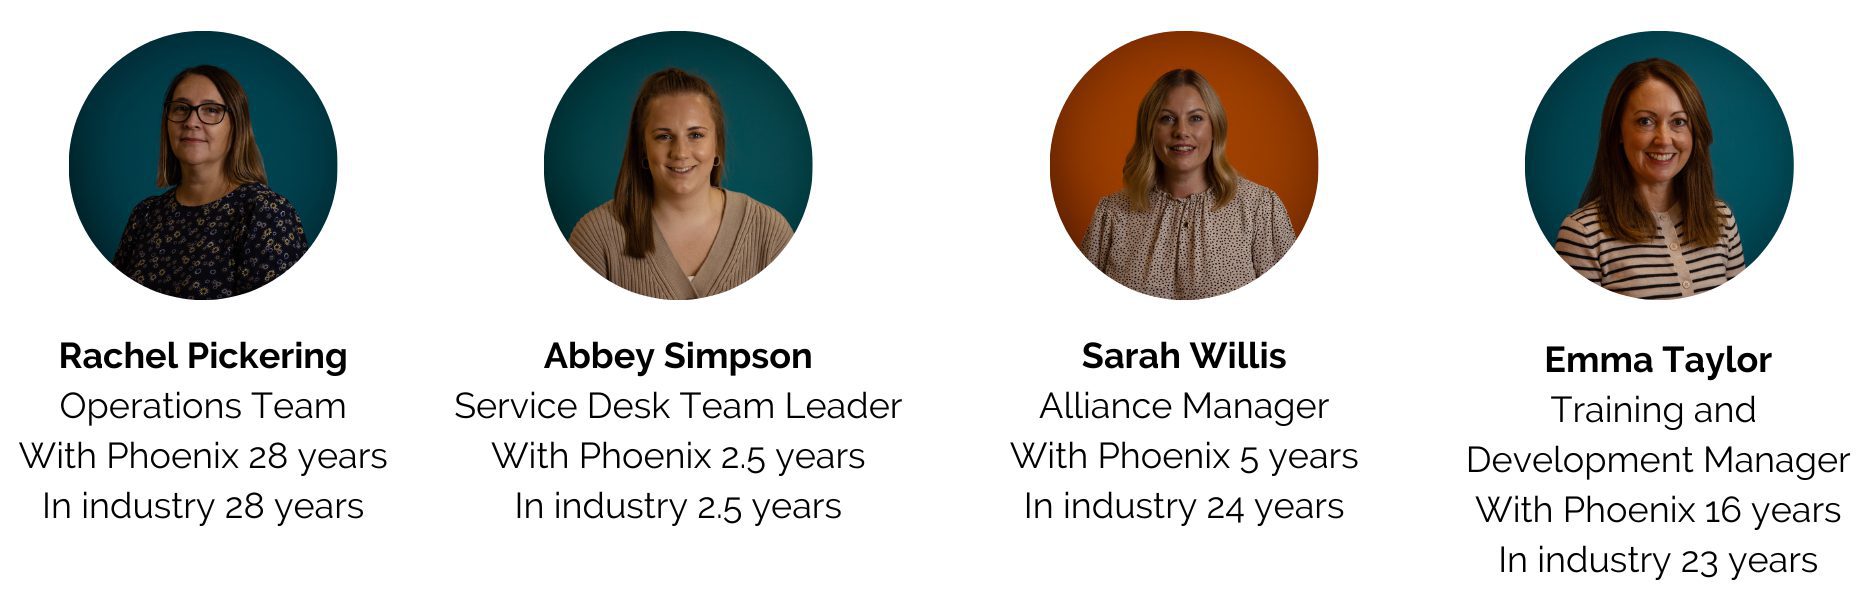 images of women that work at Phoenix and their names and job titles